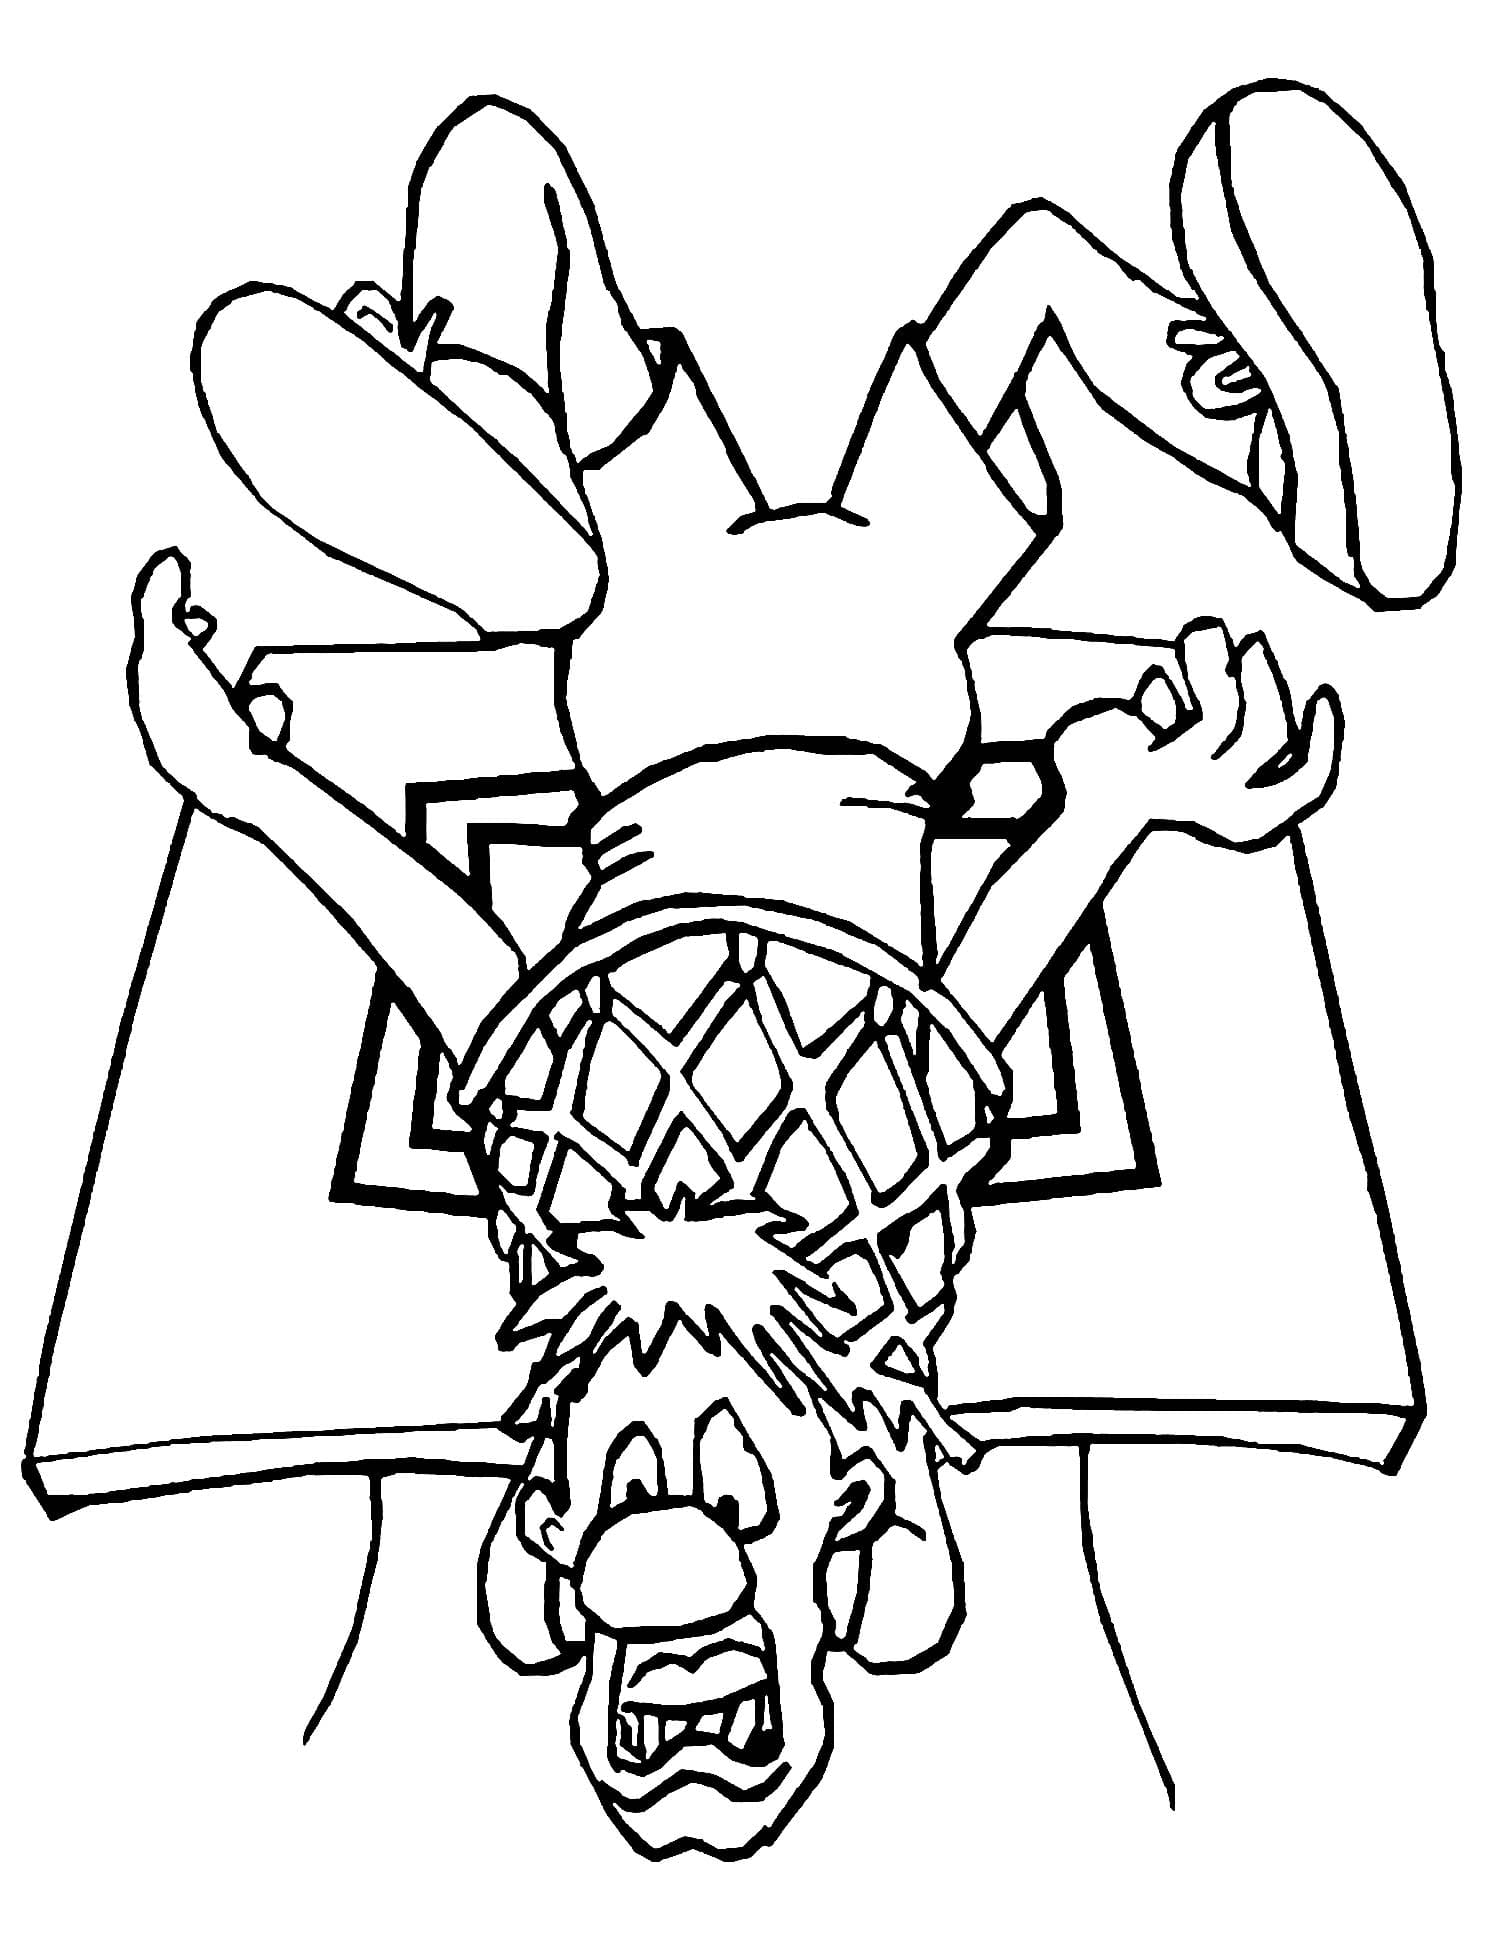 Basketball Free To Color For Kids Coloring Page